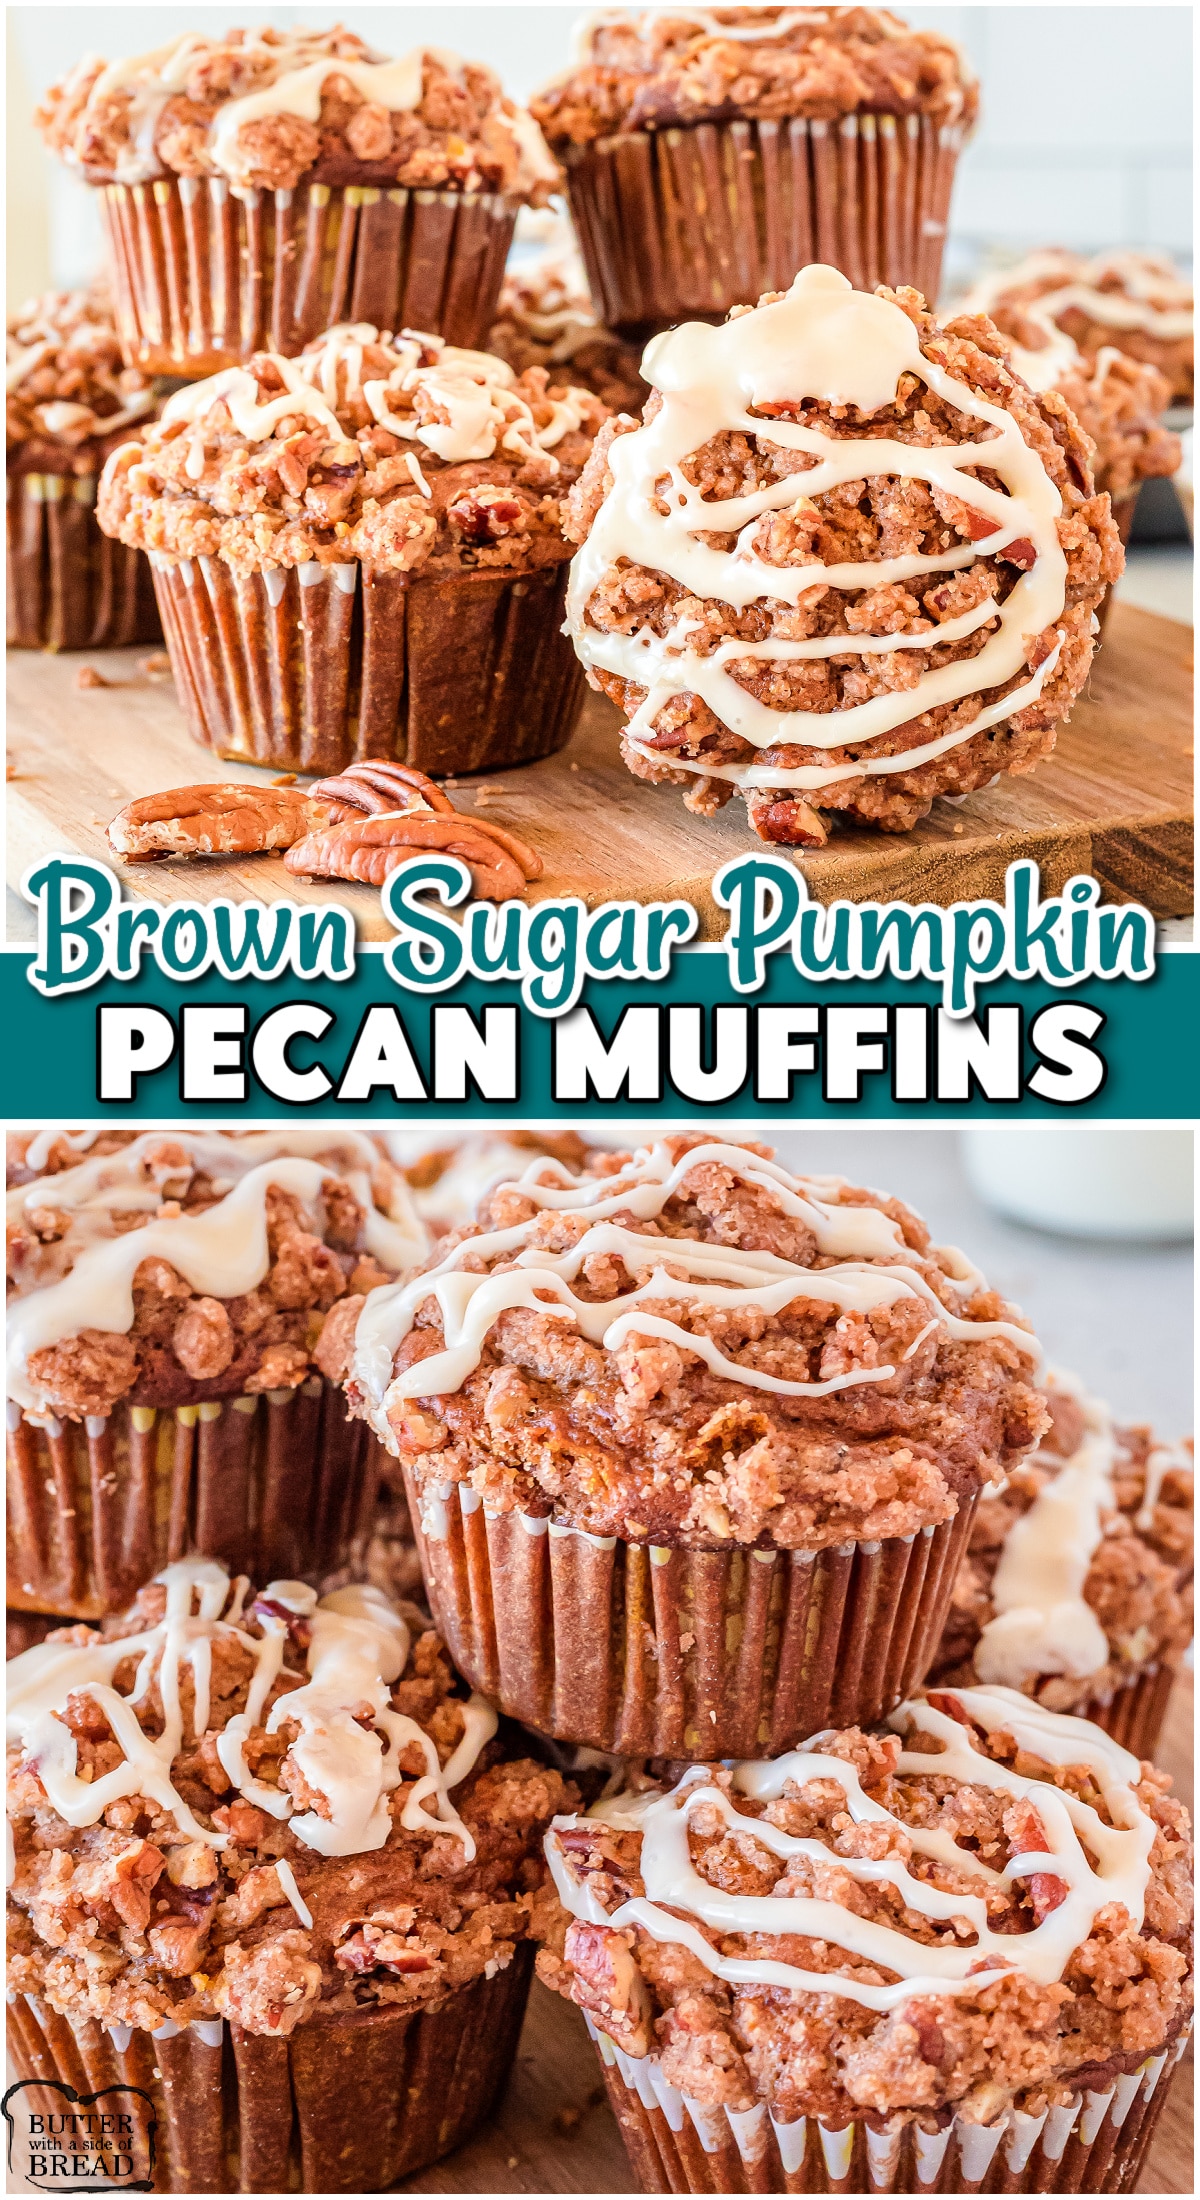 Brown Sugar Pecan Pumpkin Muffins are a delicious and easy-to-make treat perfect for Fall! These pumpkin streusel muffins are a twist on traditional pumpkin muffins, with the added crunchy streusel on top!